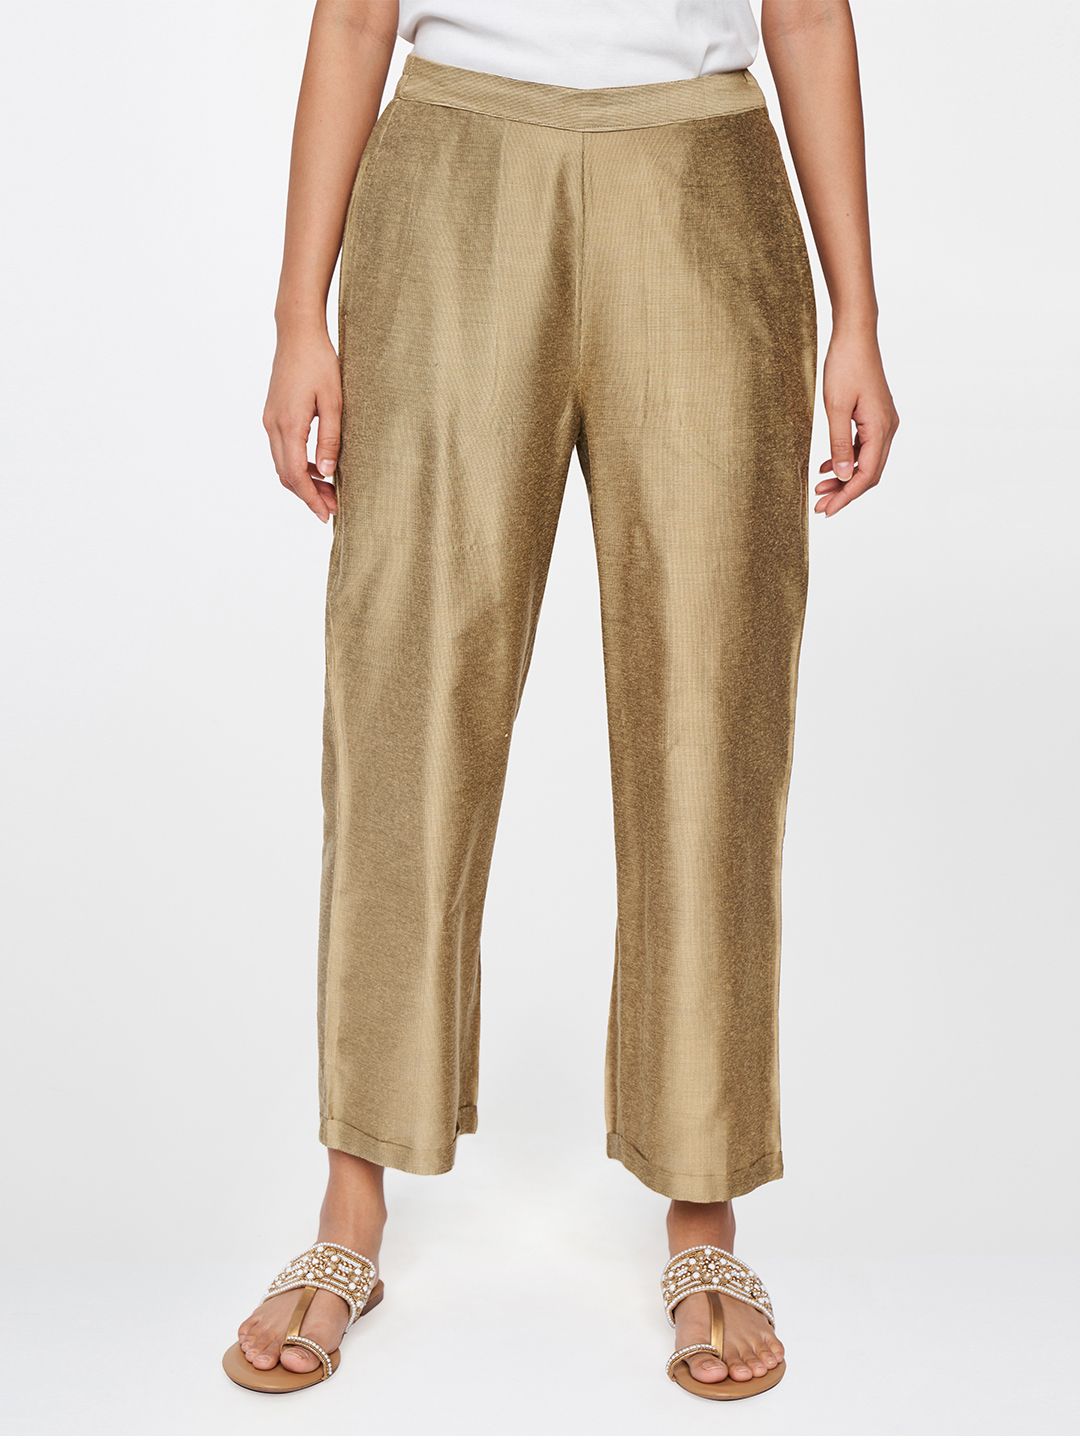 Global Desi Women Beige Striped Parallel Trousers Price in India